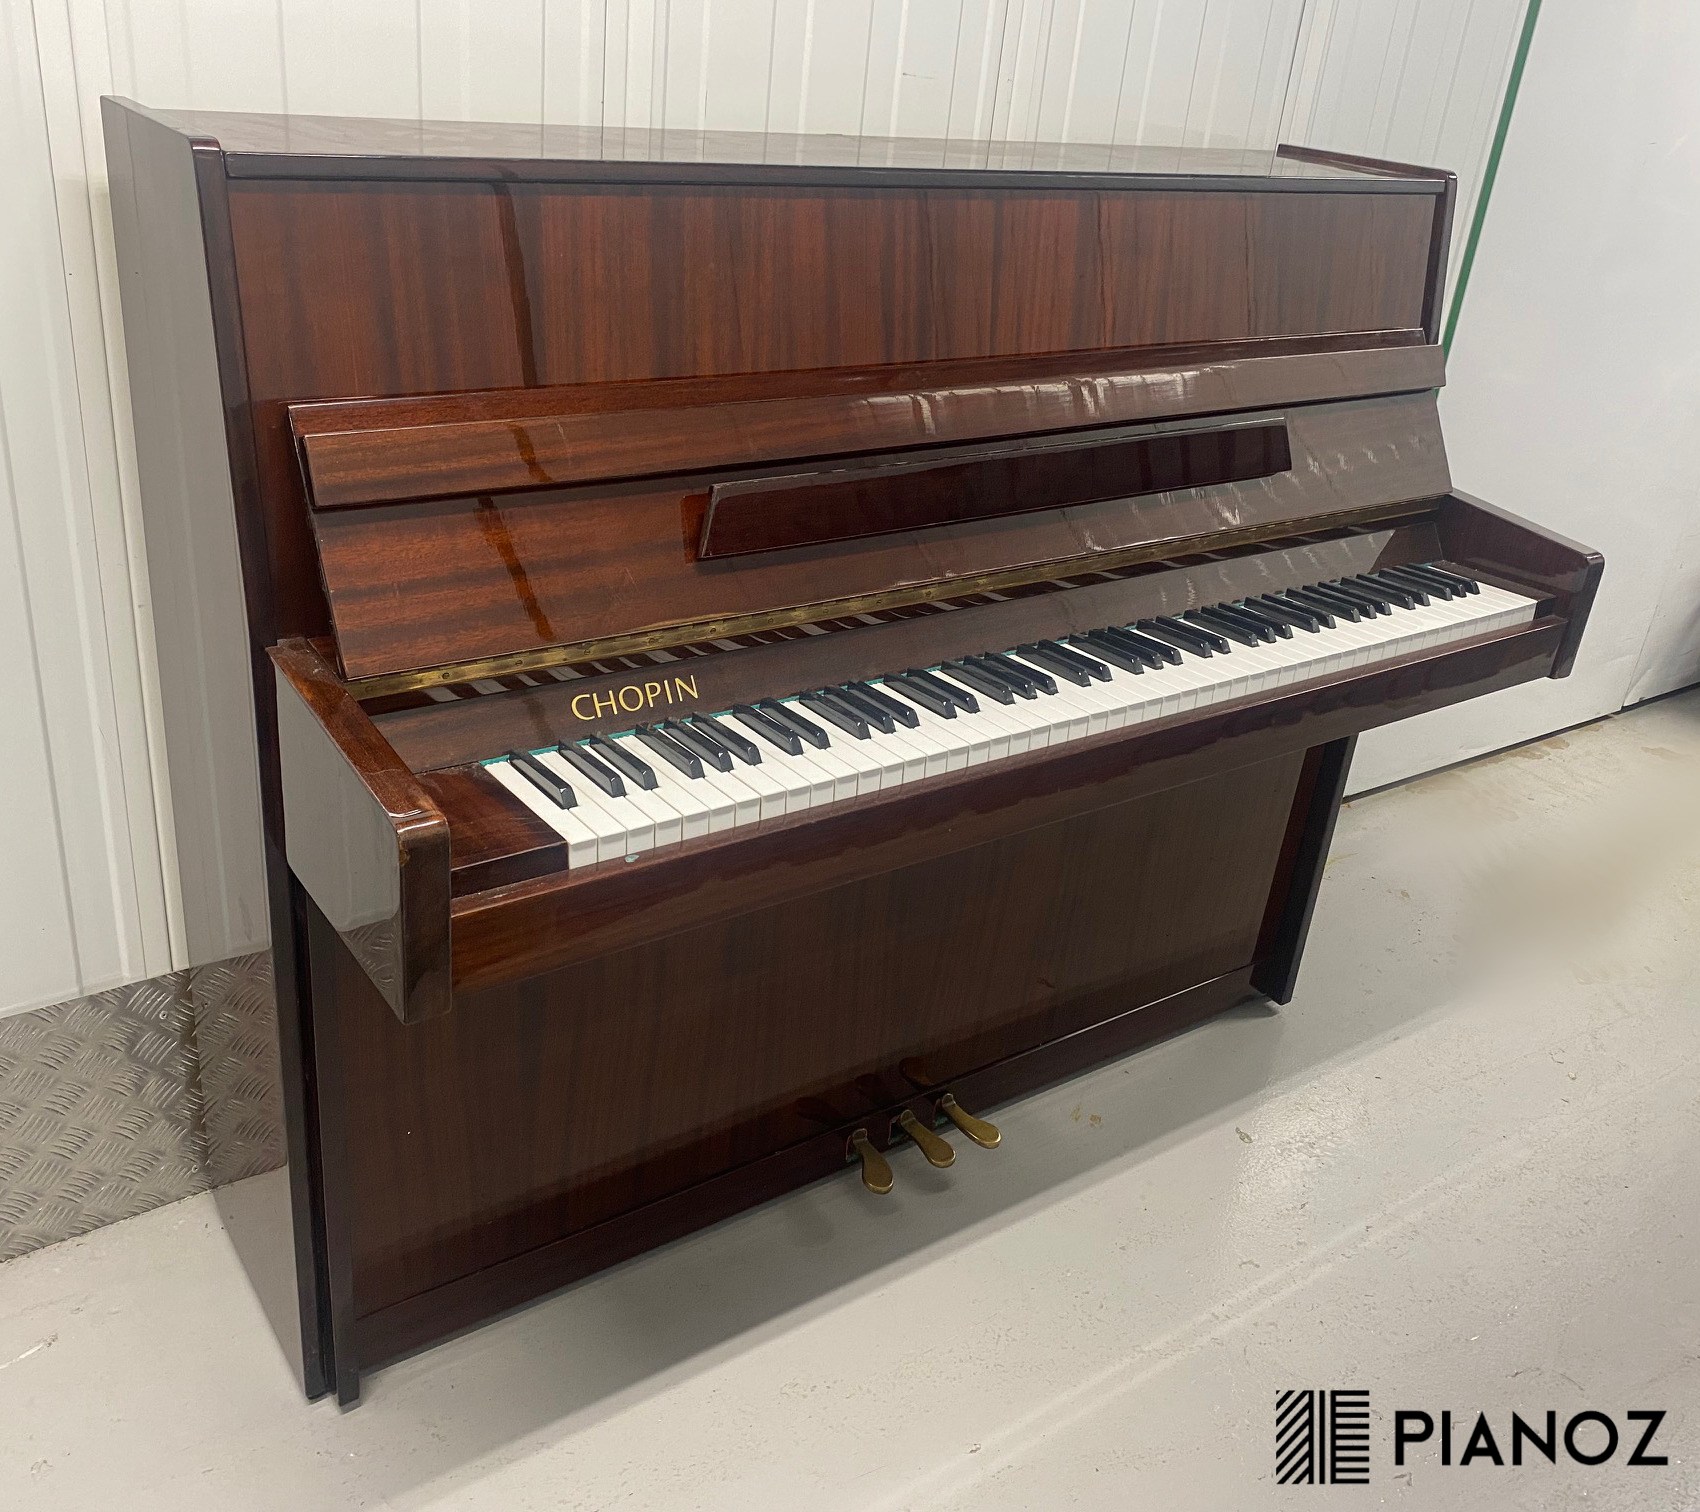 Chopin High Gloss Upright Piano piano for sale in UK